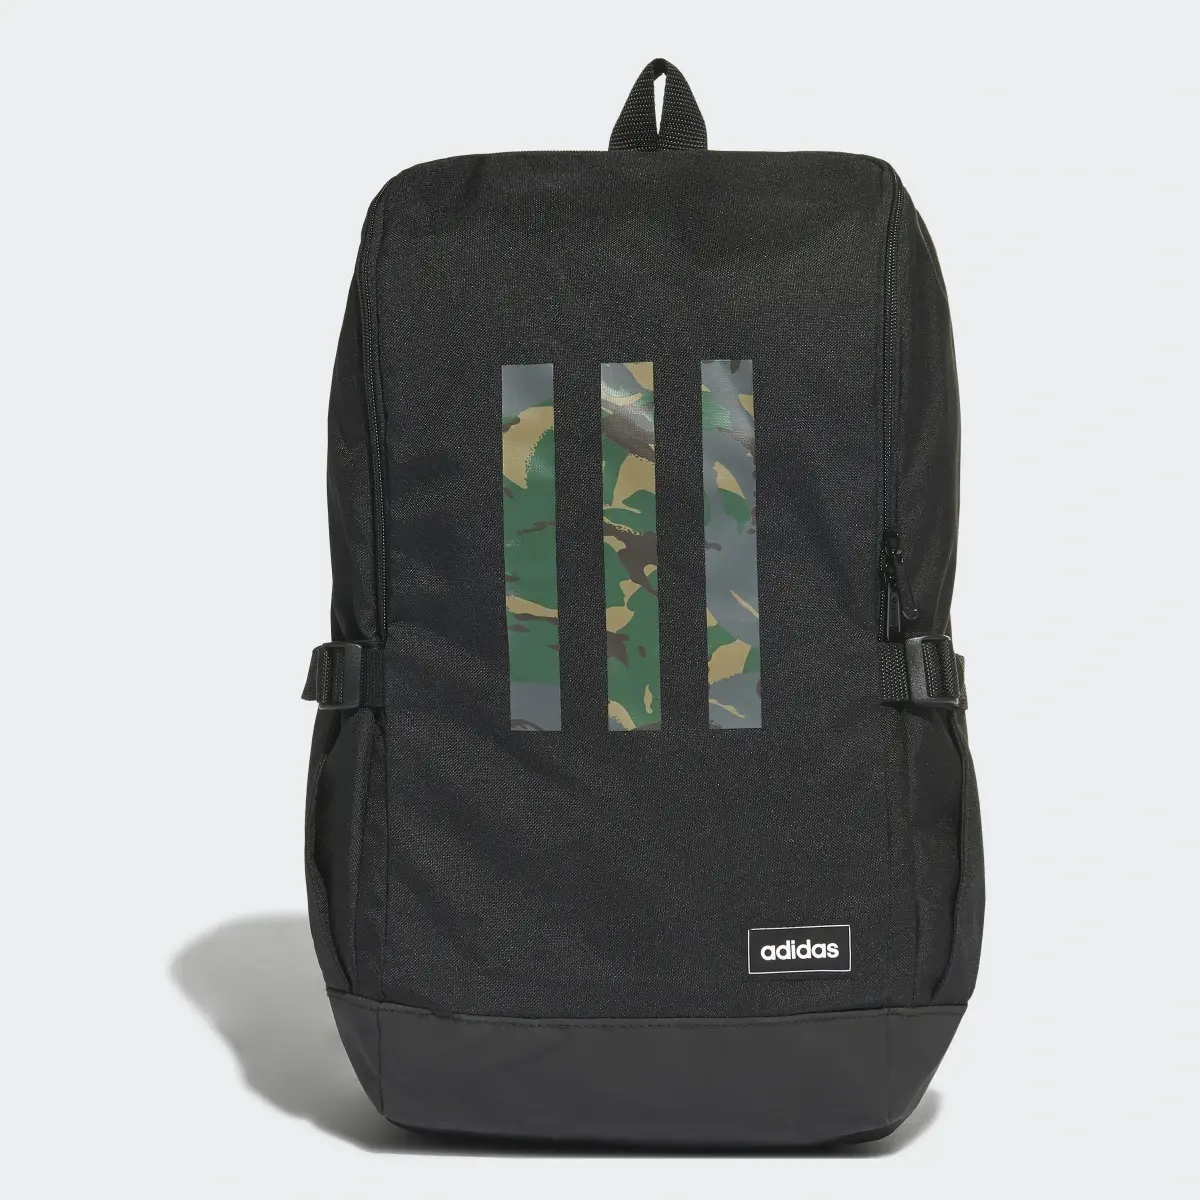 Adidas Classic Response Camouflage Backpack. 1